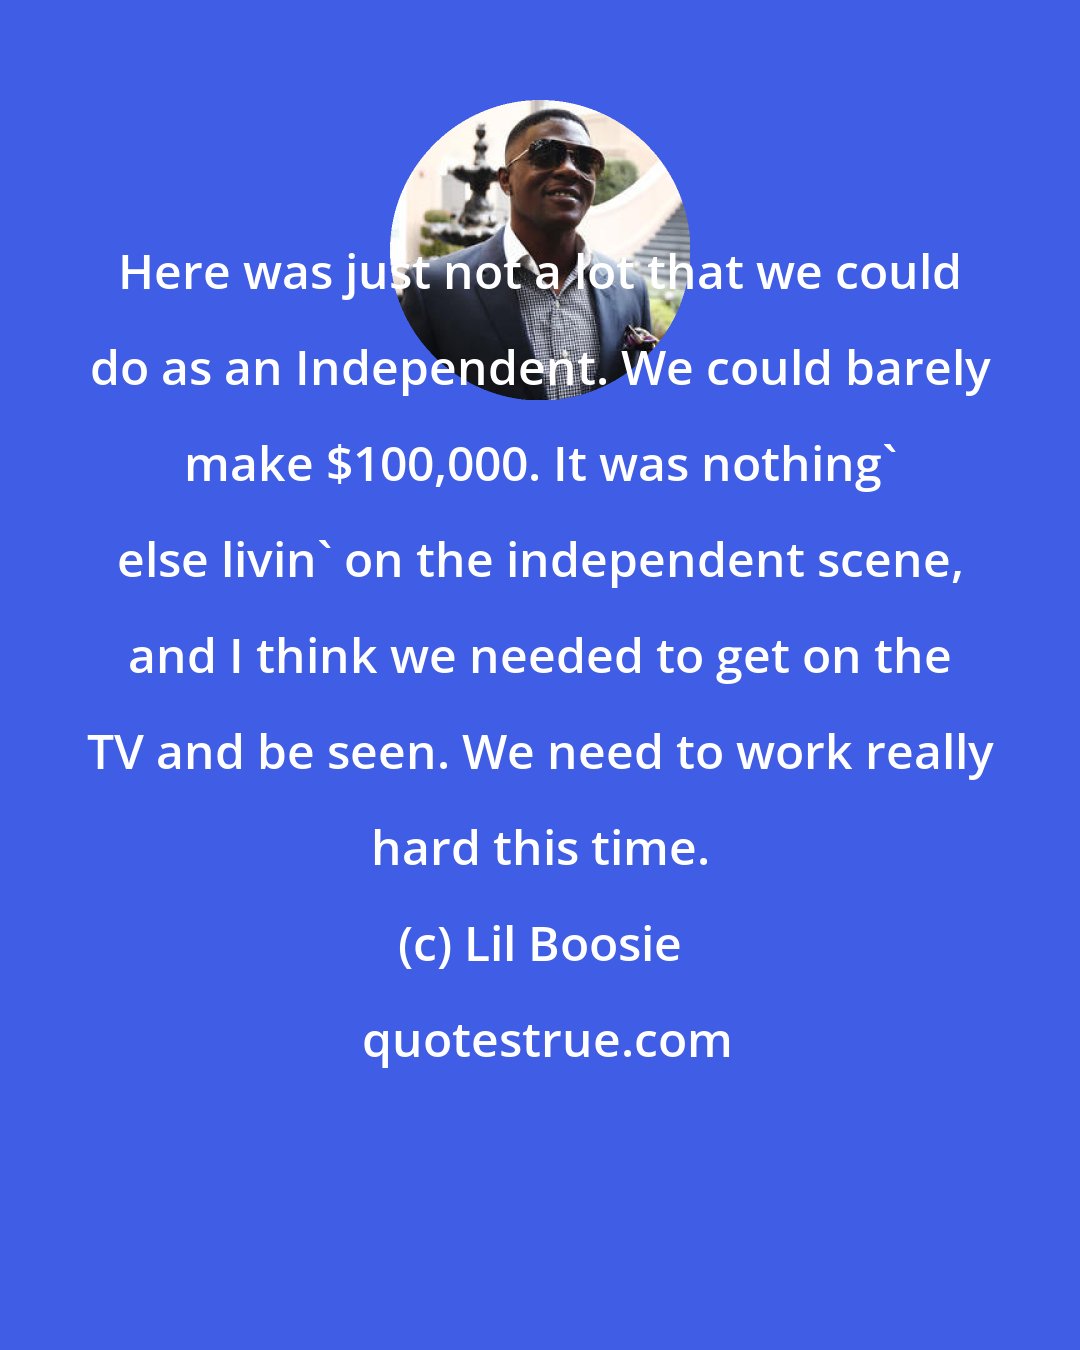 Lil Boosie: Here was just not a lot that we could do as an Independent. We could barely make $100,000. It was nothing' else livin' on the independent scene, and I think we needed to get on the TV and be seen. We need to work really hard this time.